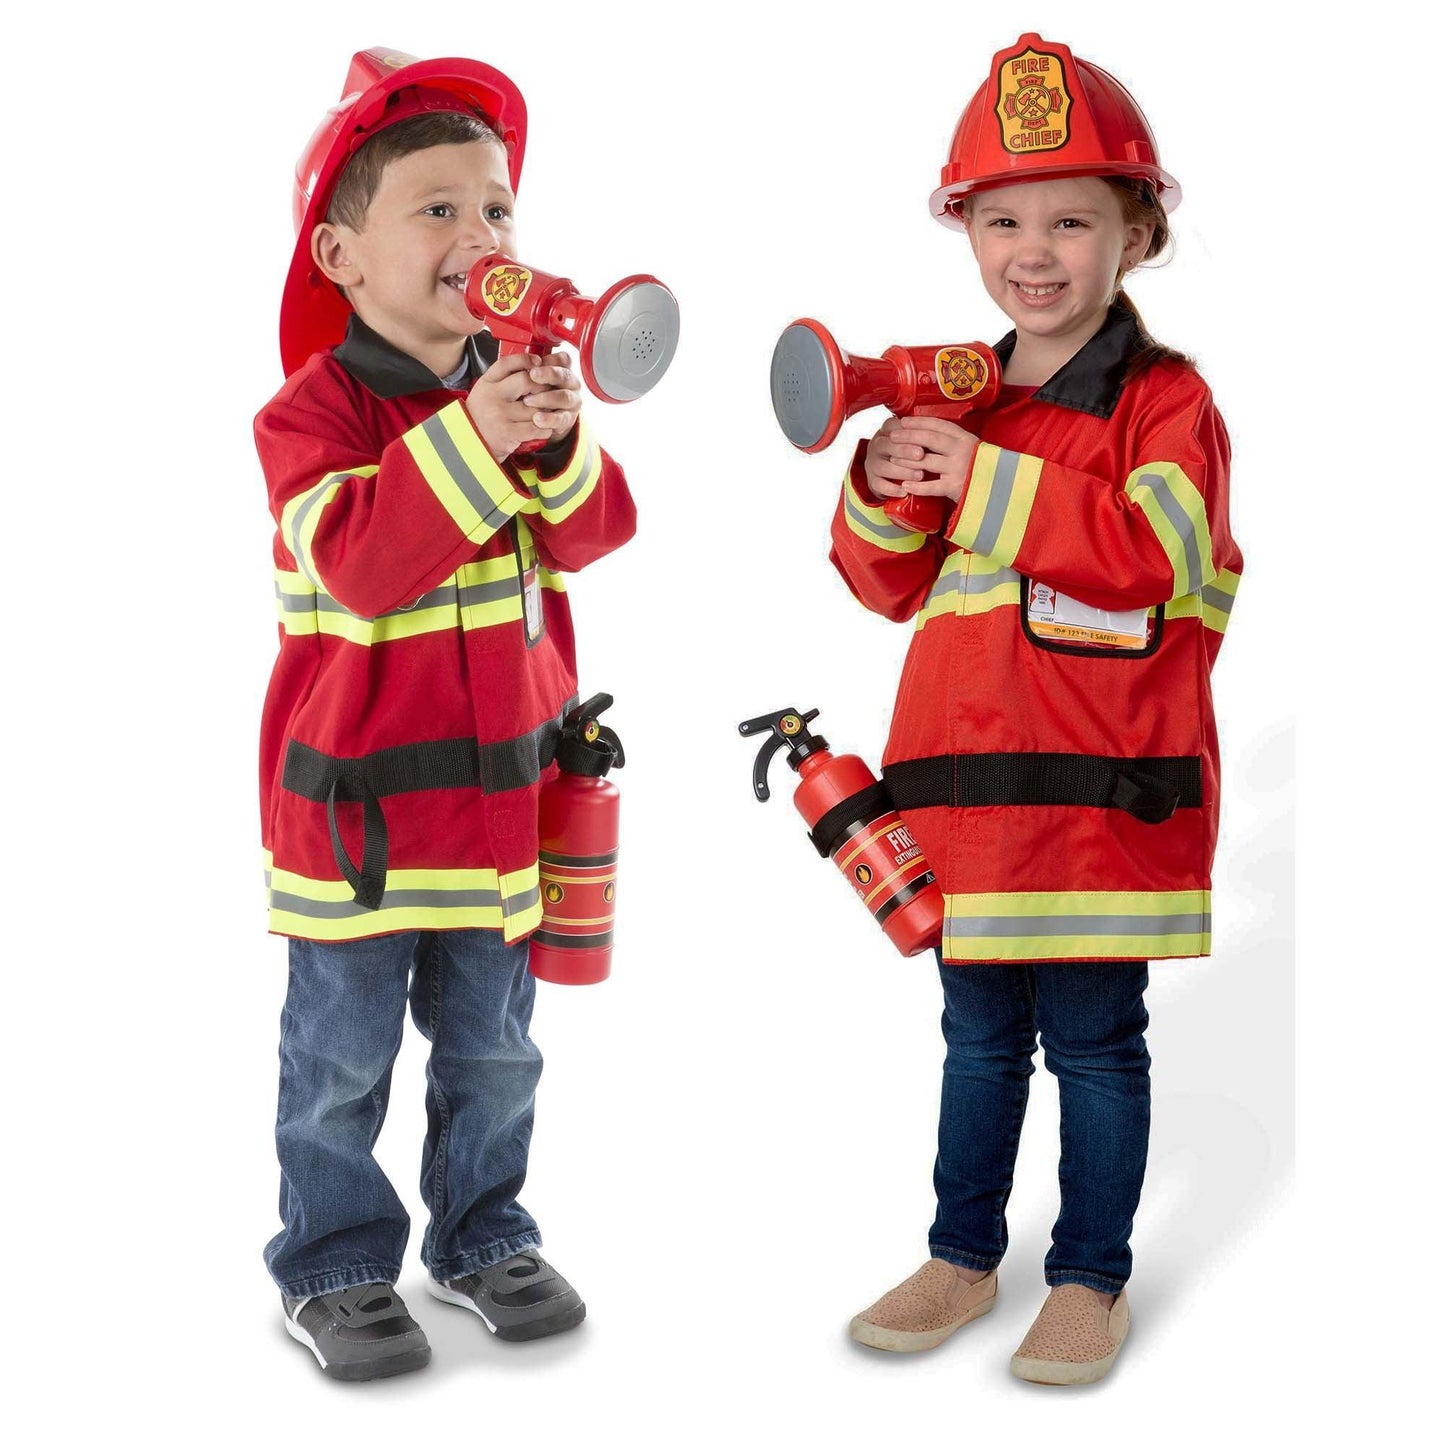 Fire Chief Role Play Costume Set - Loomini